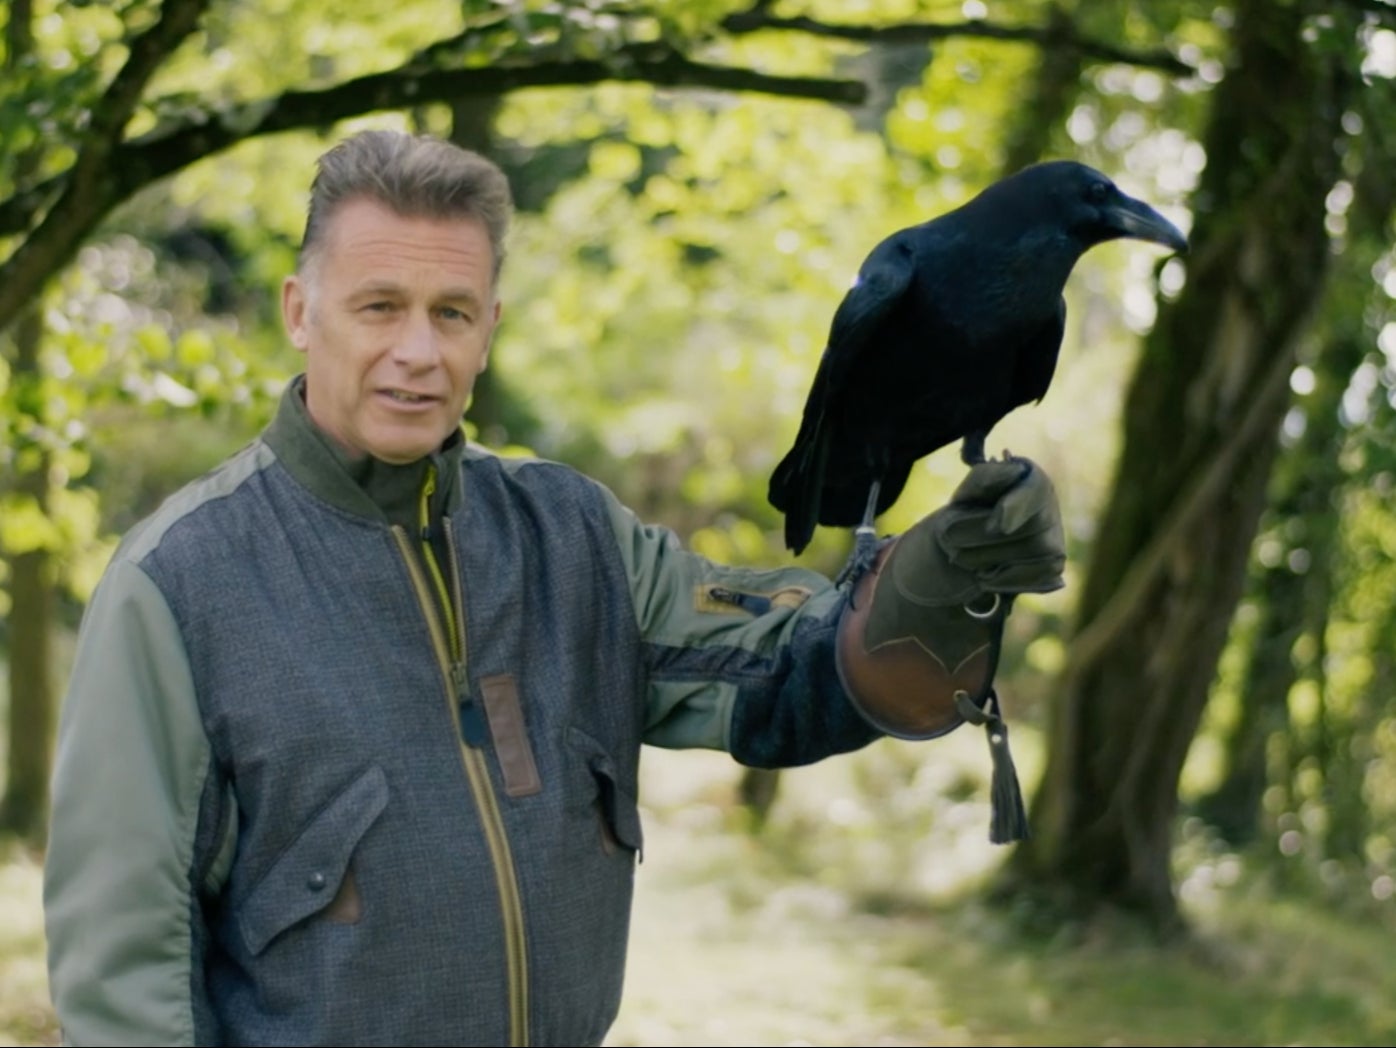 Chris Packham with Bran the raven - a species of bird with better problem solving skills than a five-year-old human child